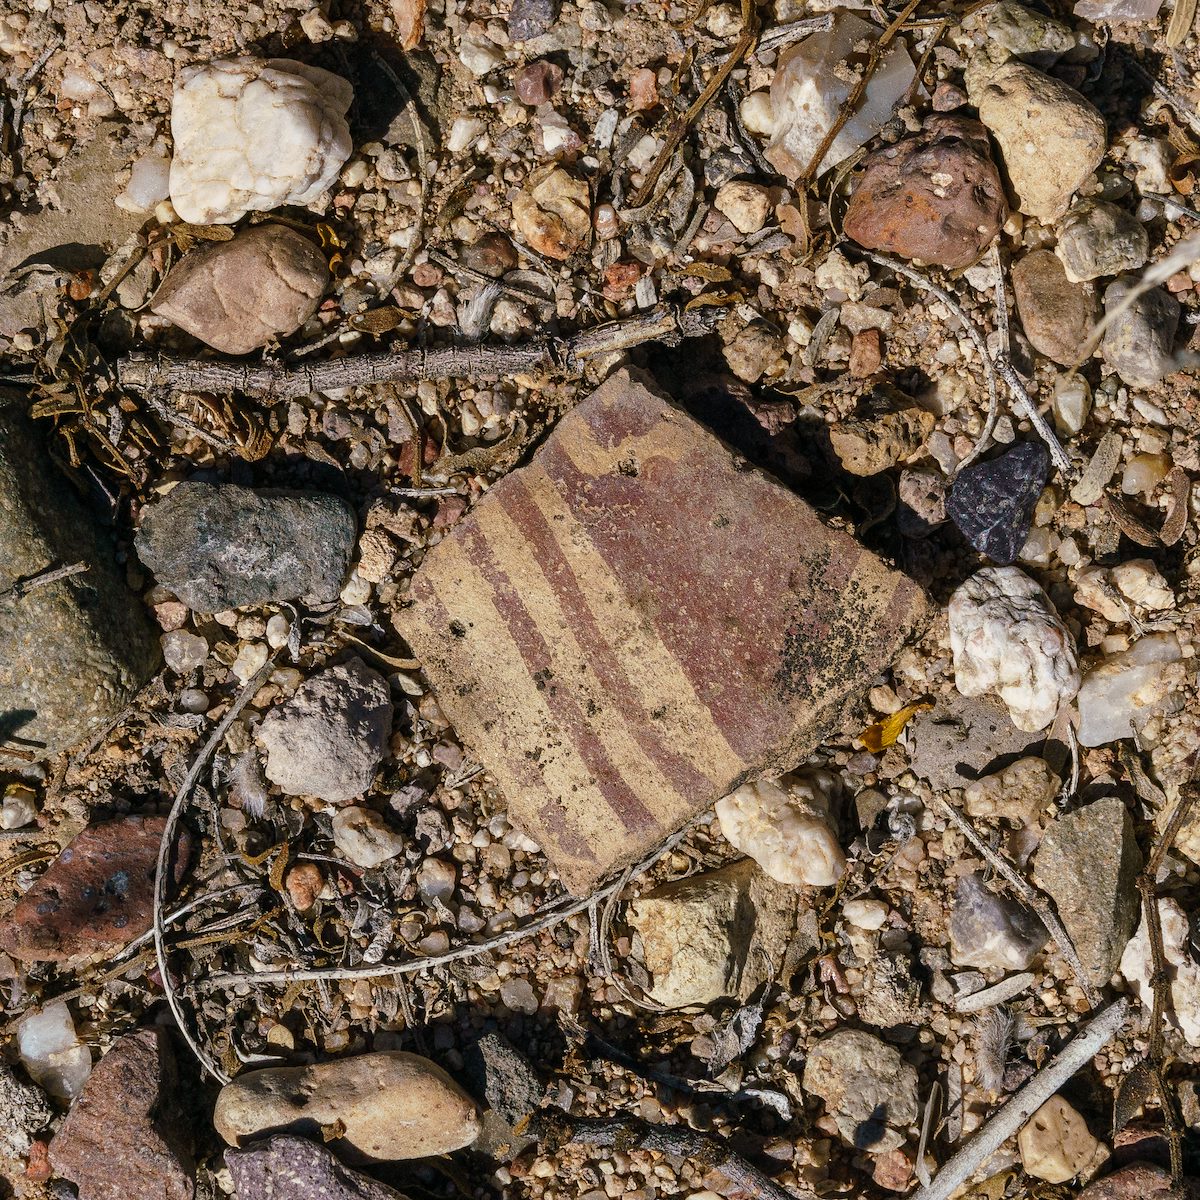 2018 March Pottery Sherd at Los Morteros 02